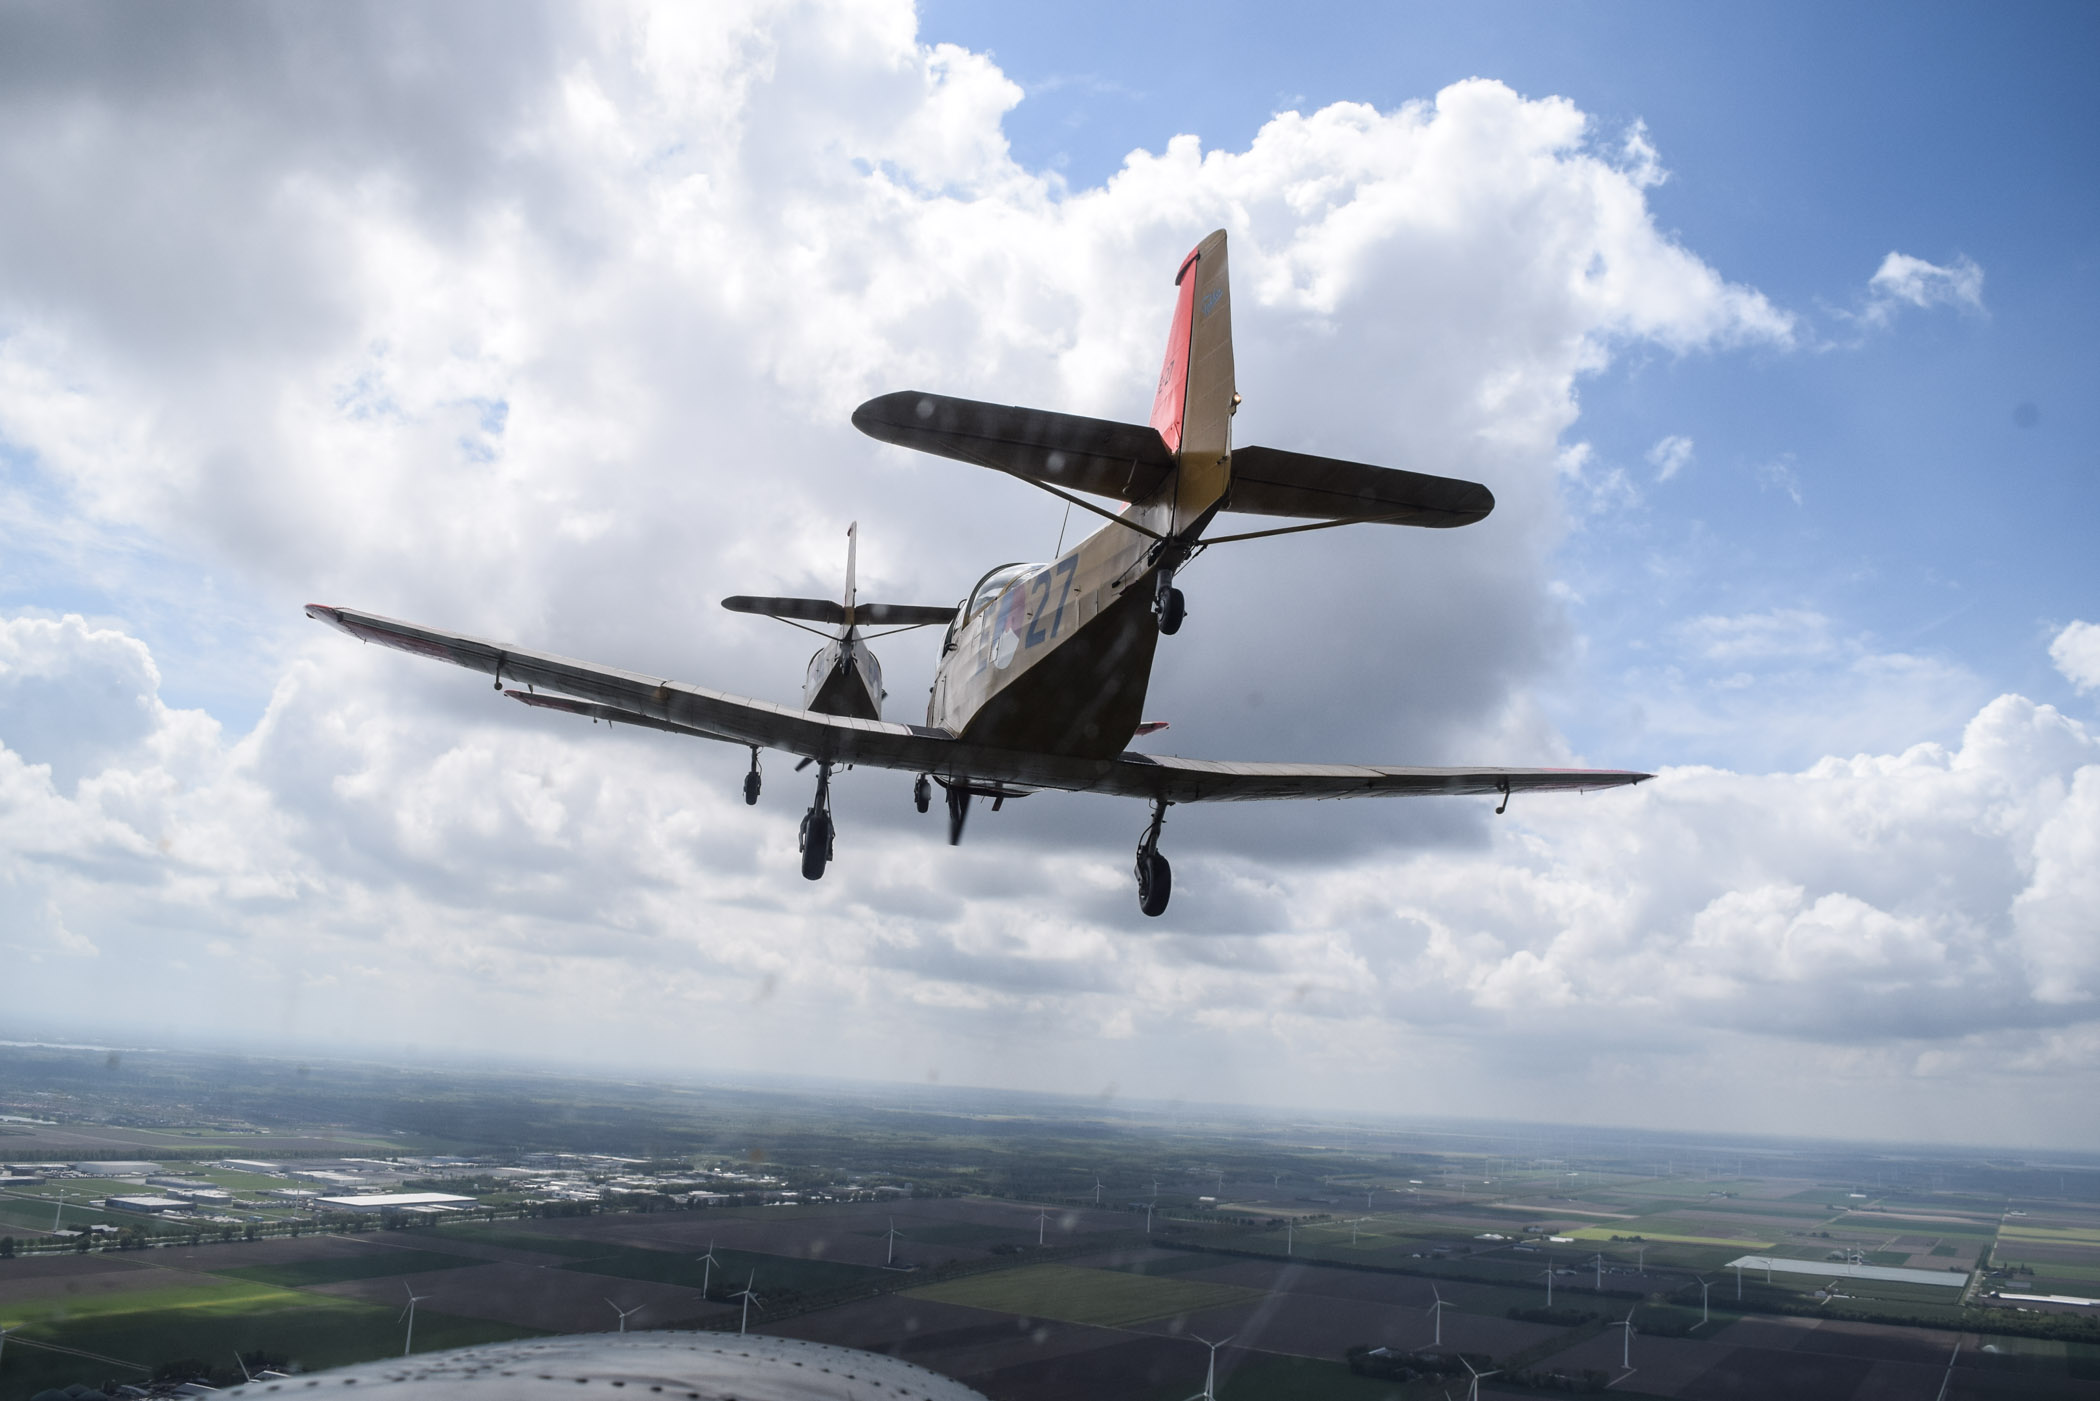 Up in the air with a Van der Gang Vlieger watch - 3